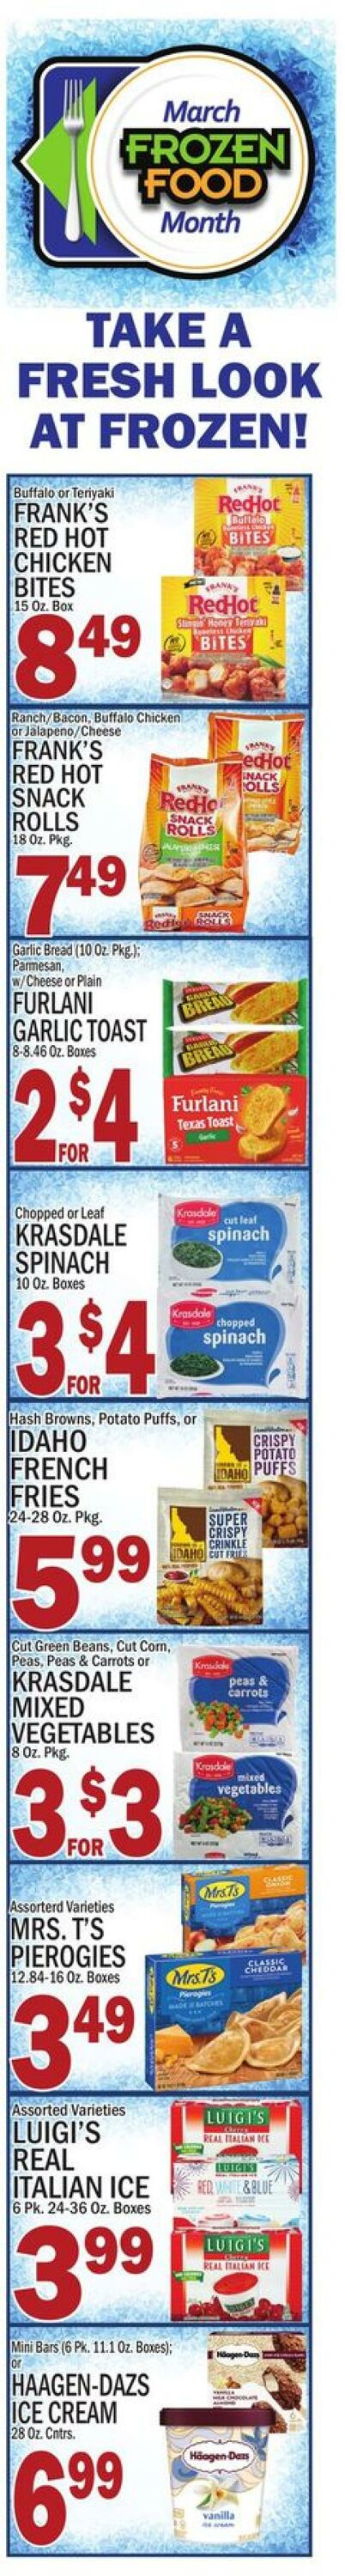 Weekly ad CTown 03/03/2023 - 03/09/2023